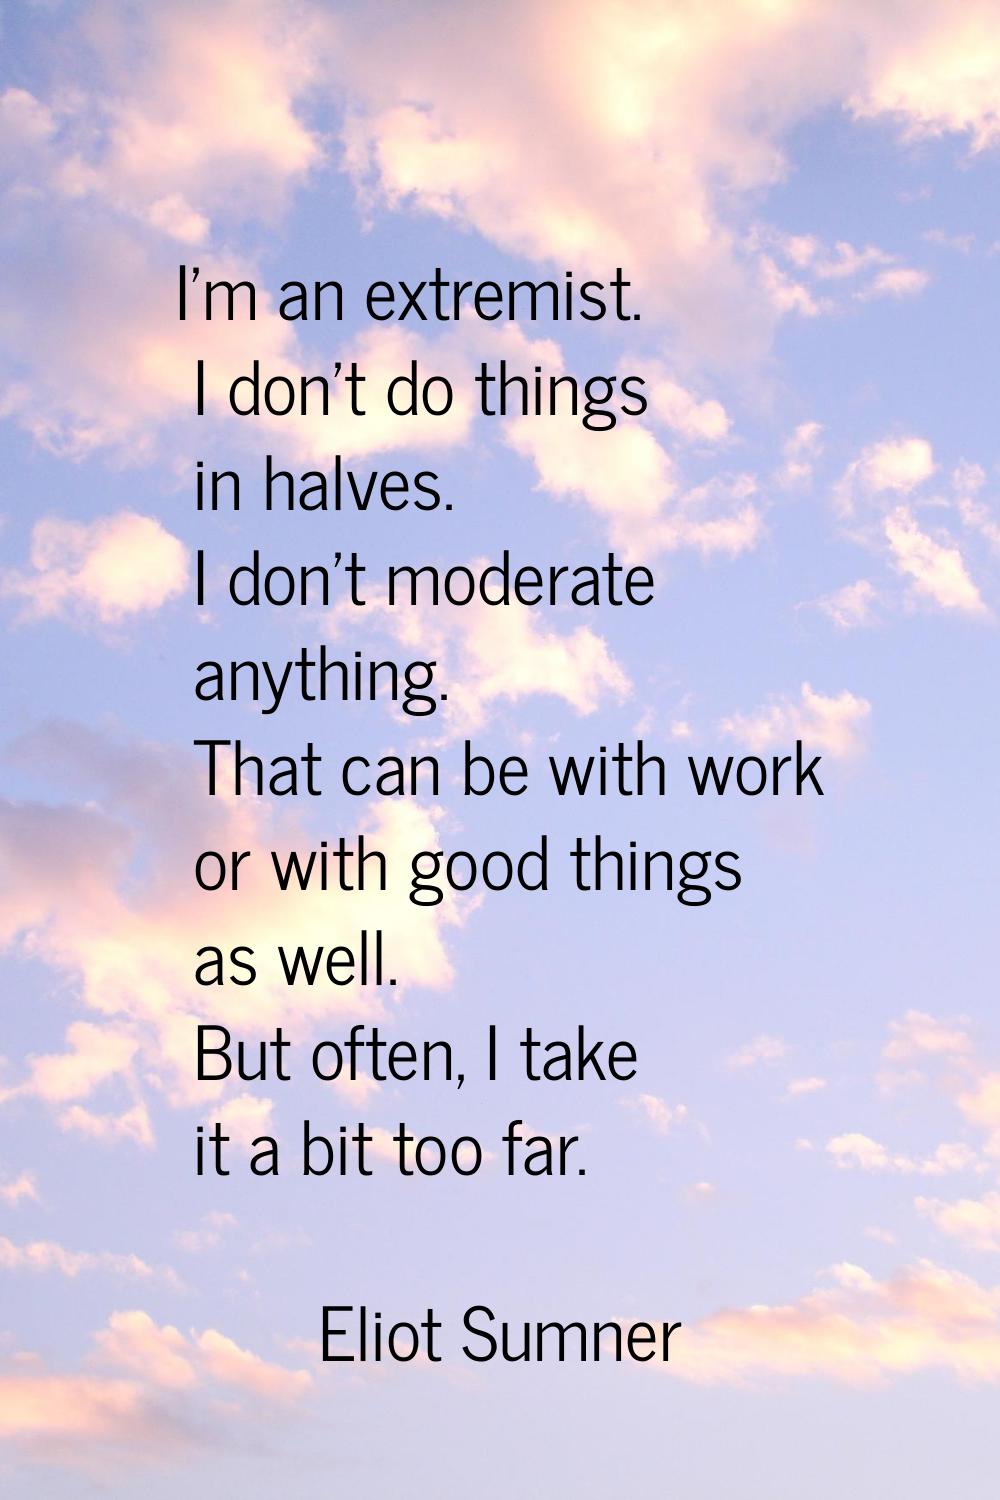 I'm an extremist. I don't do things in halves. I don't moderate anything. That can be with work or 